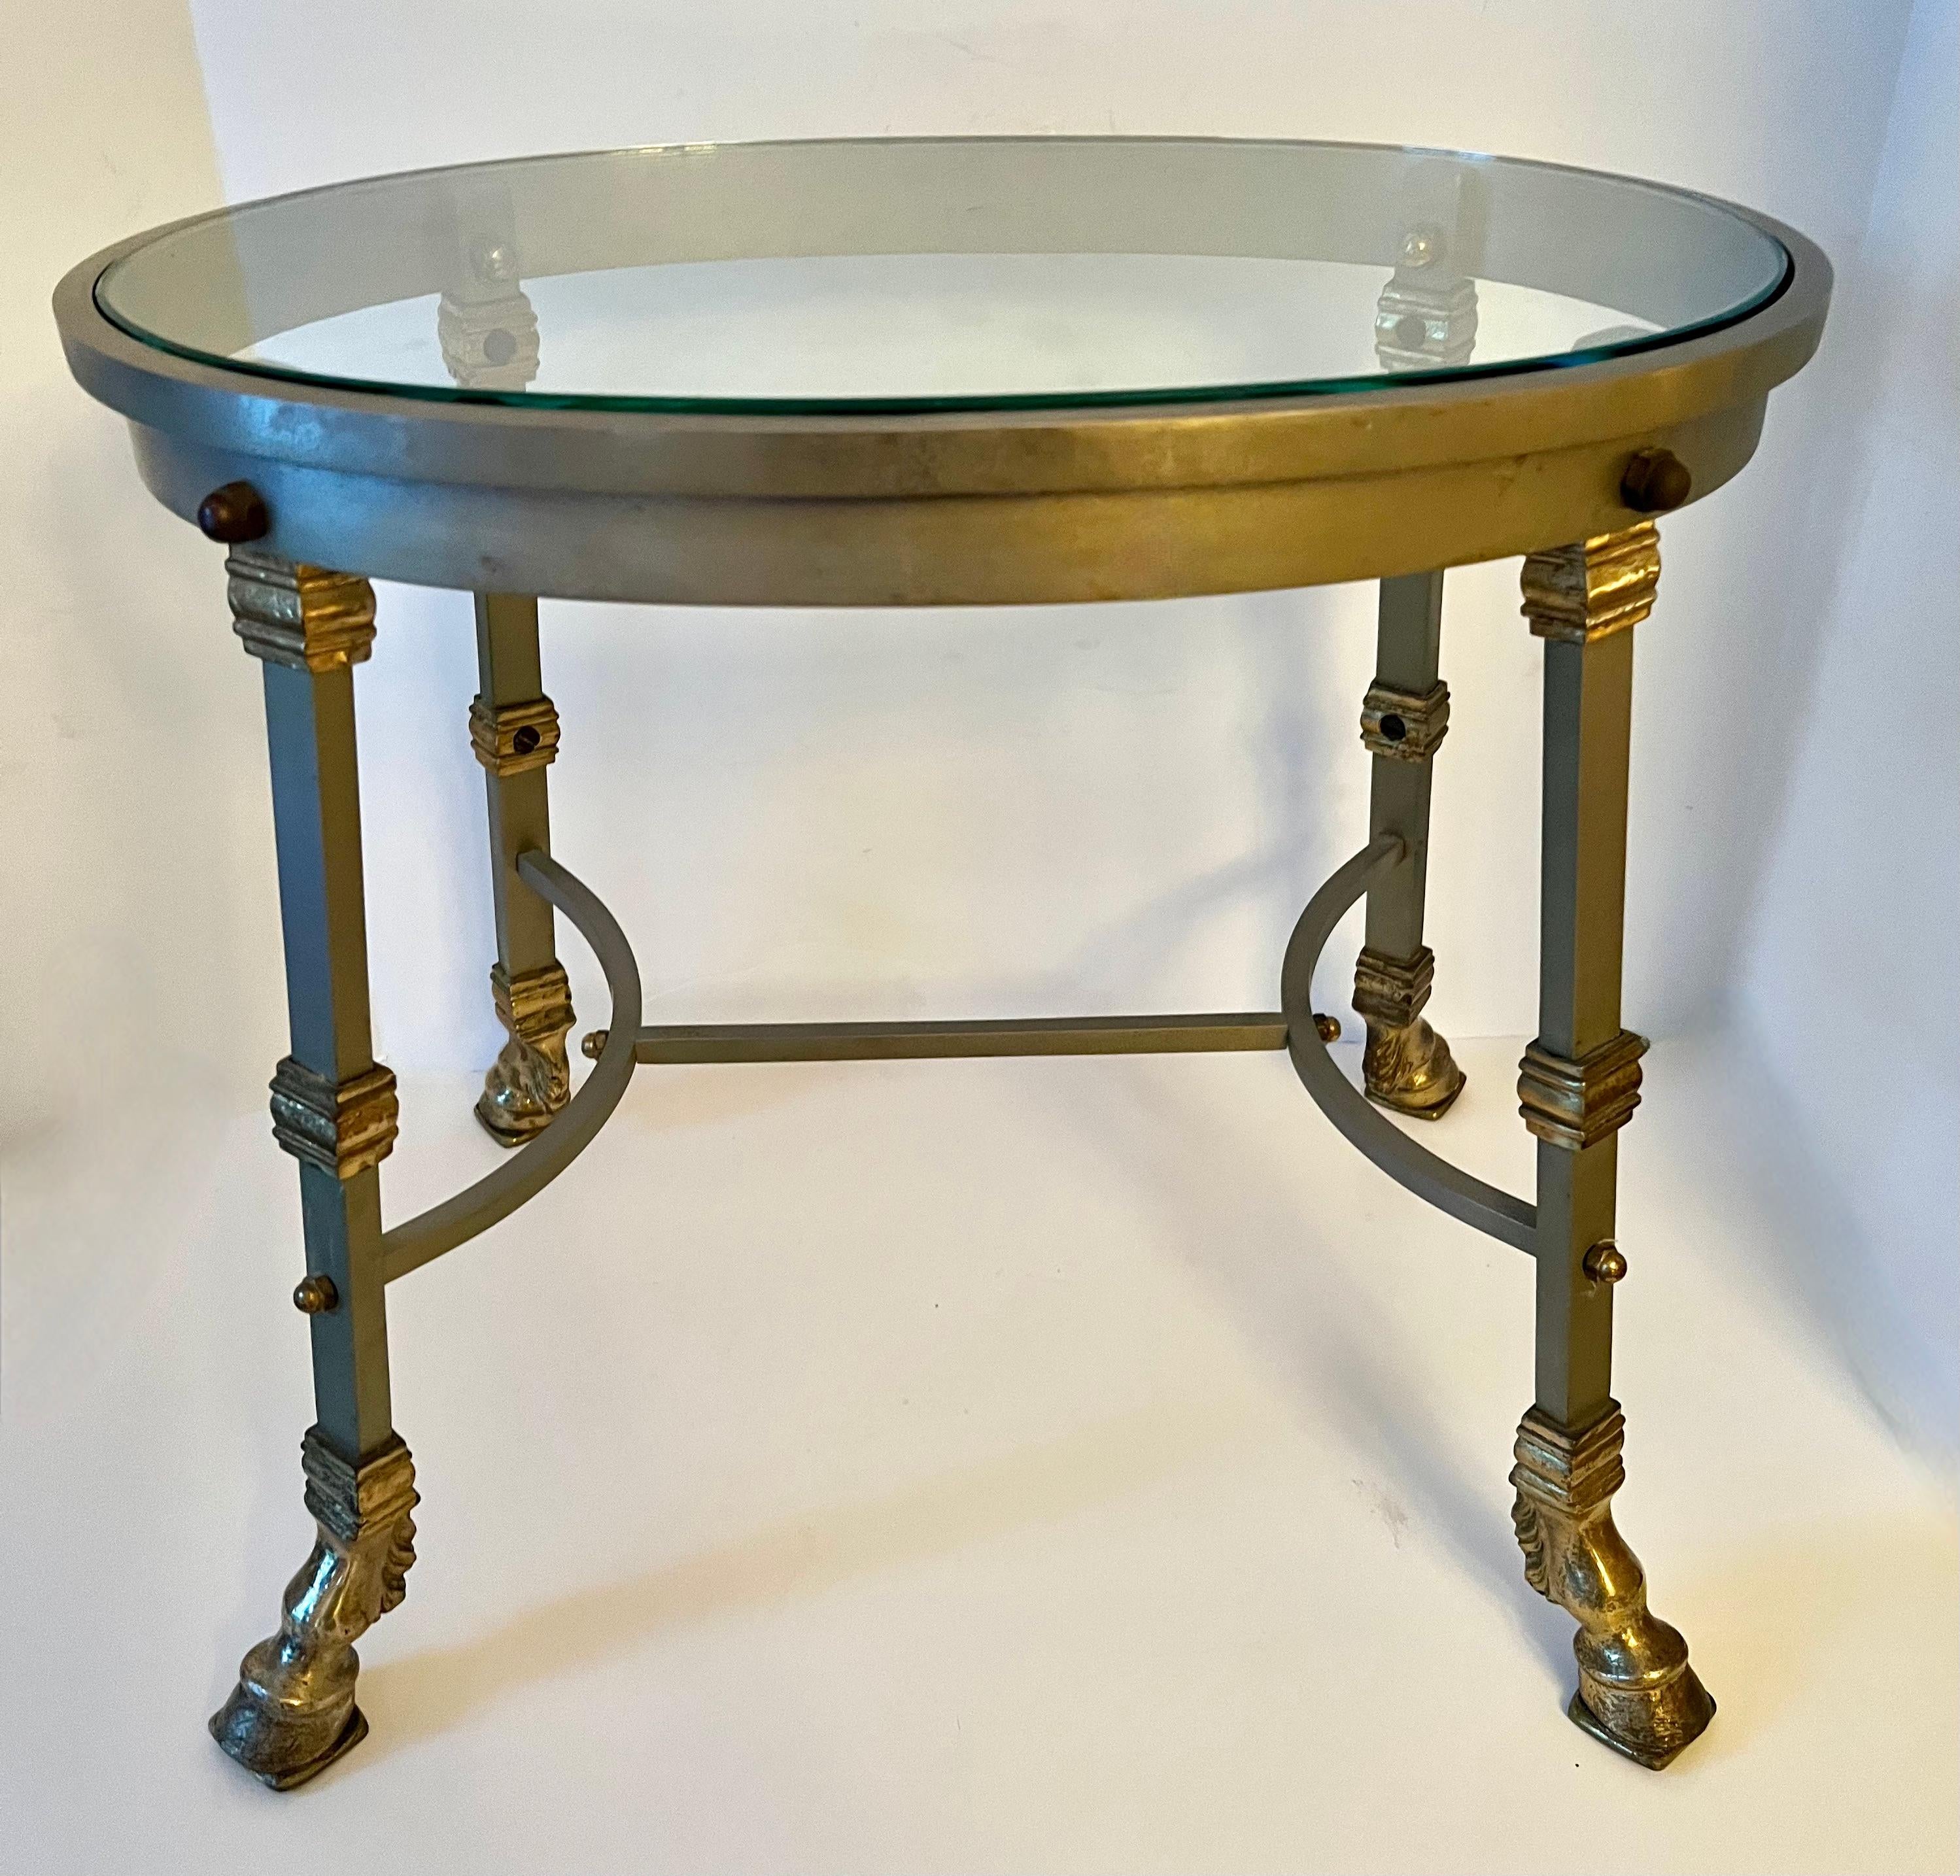 Patinated French Glass Top Maison Jansen Steel and Brass Side Table with Bronze Hoof Feet For Sale